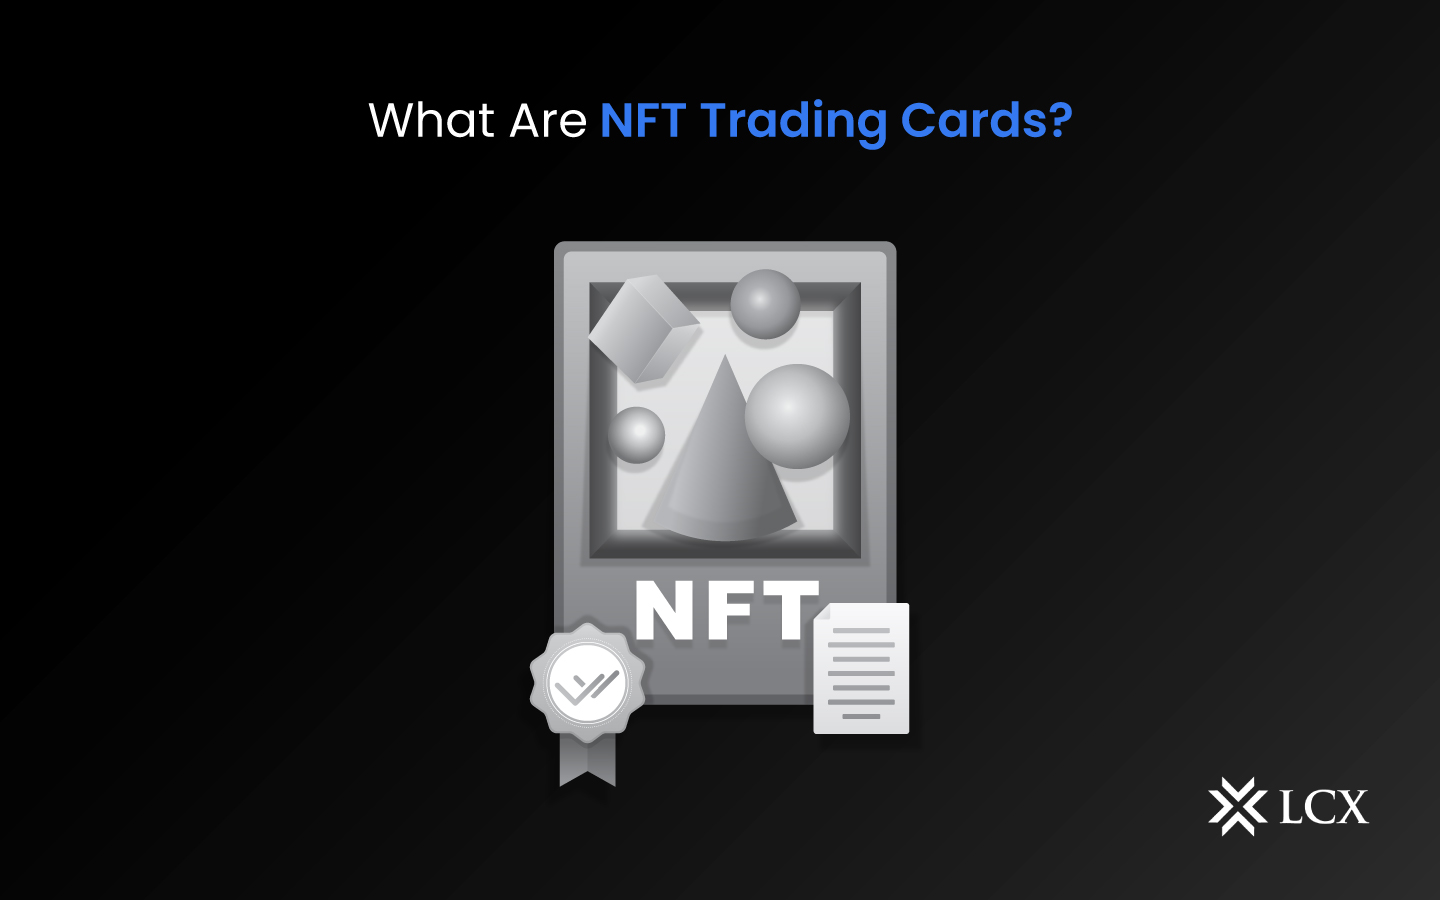 An overview of NFT trading cards